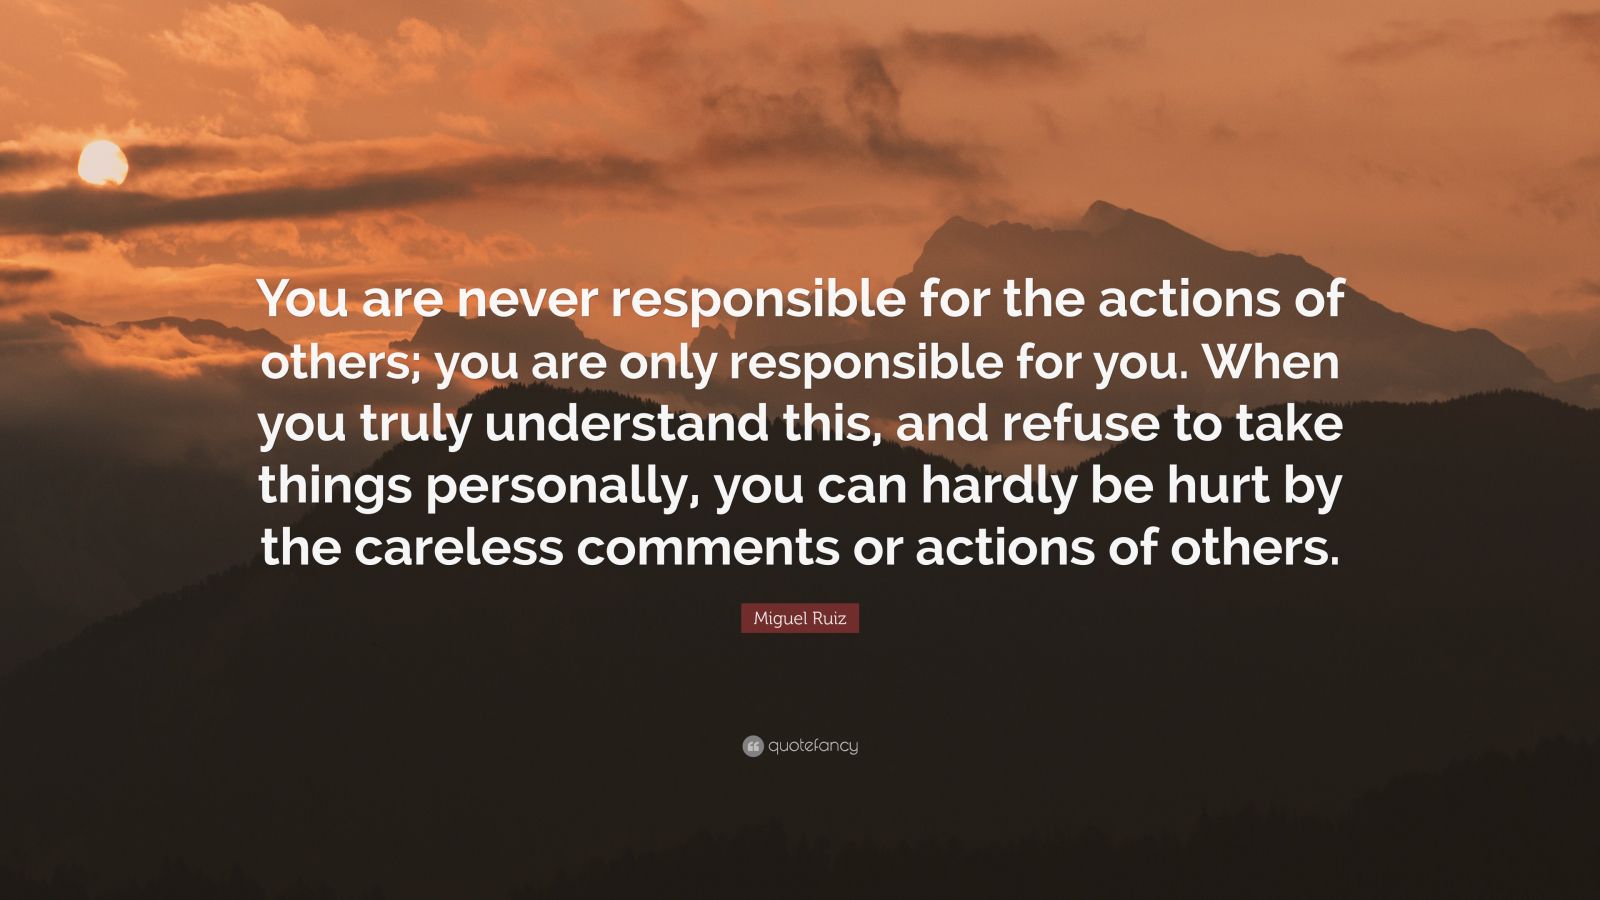 Miguel Ruiz Quote “you Are Never Responsible For The Actions Of Others